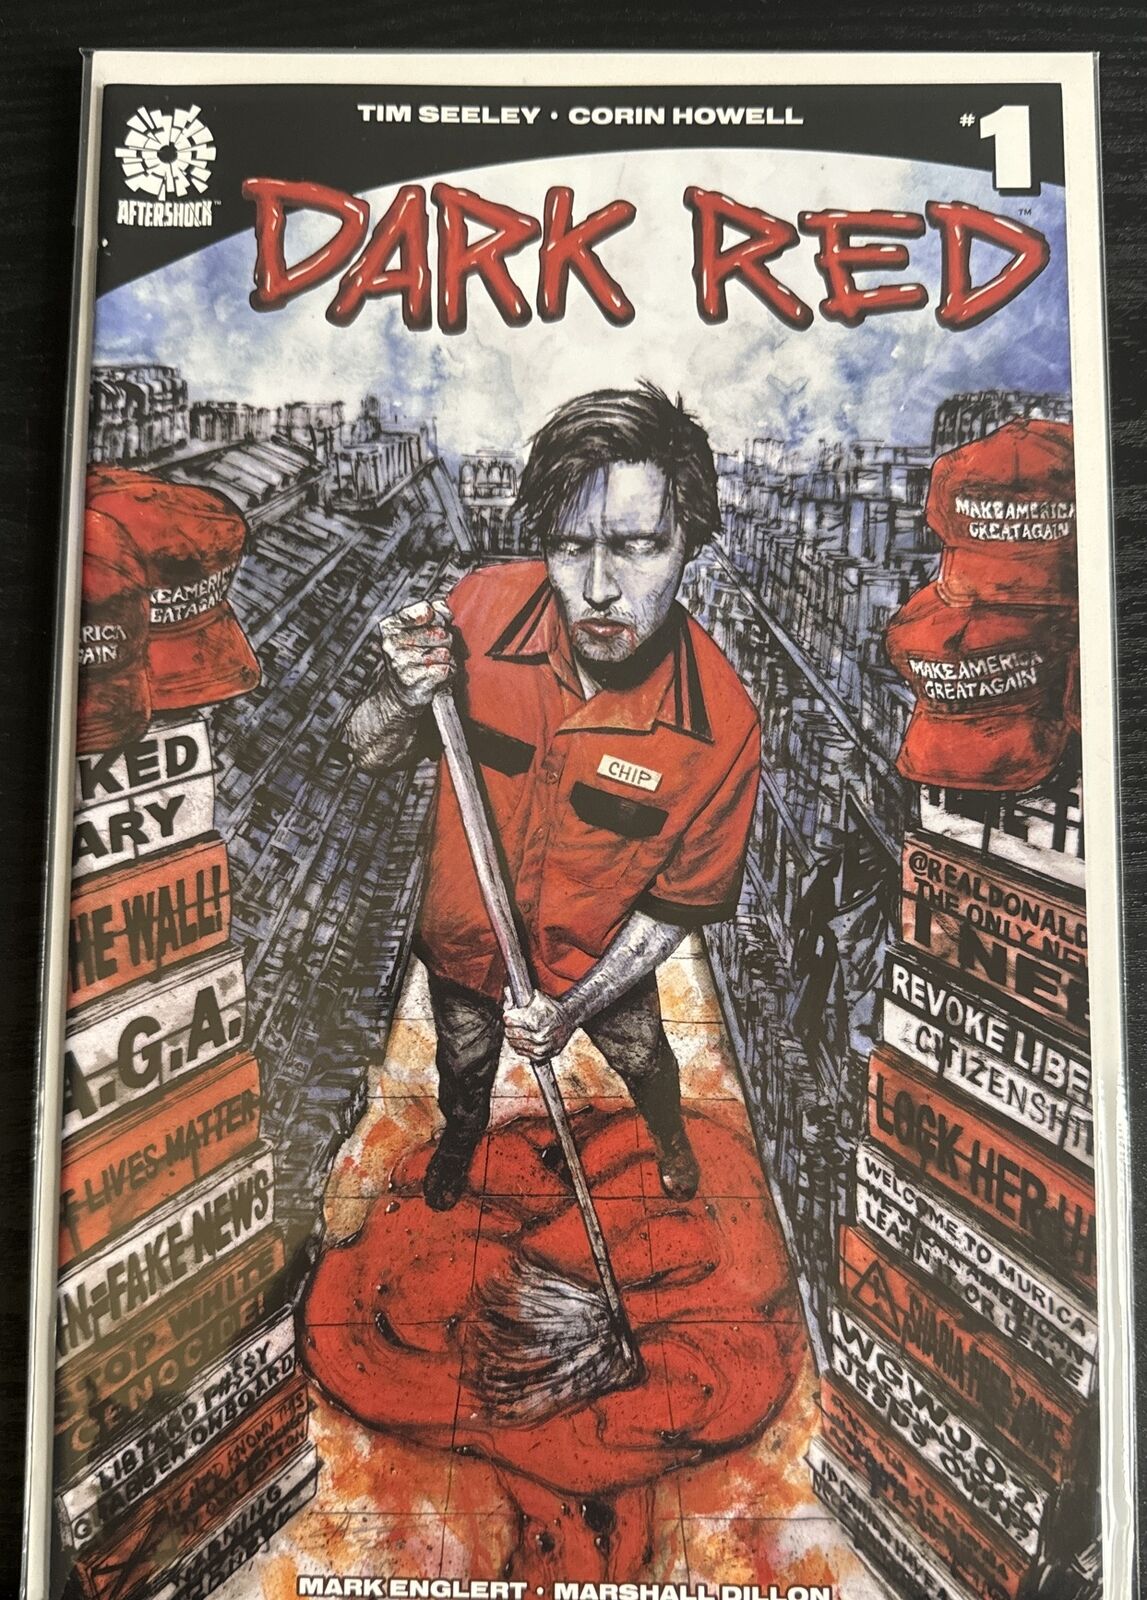 Dark Red #1 Cover 1A AfterShock Comics 2019 Seeley Howell NM 1st Print Optioned